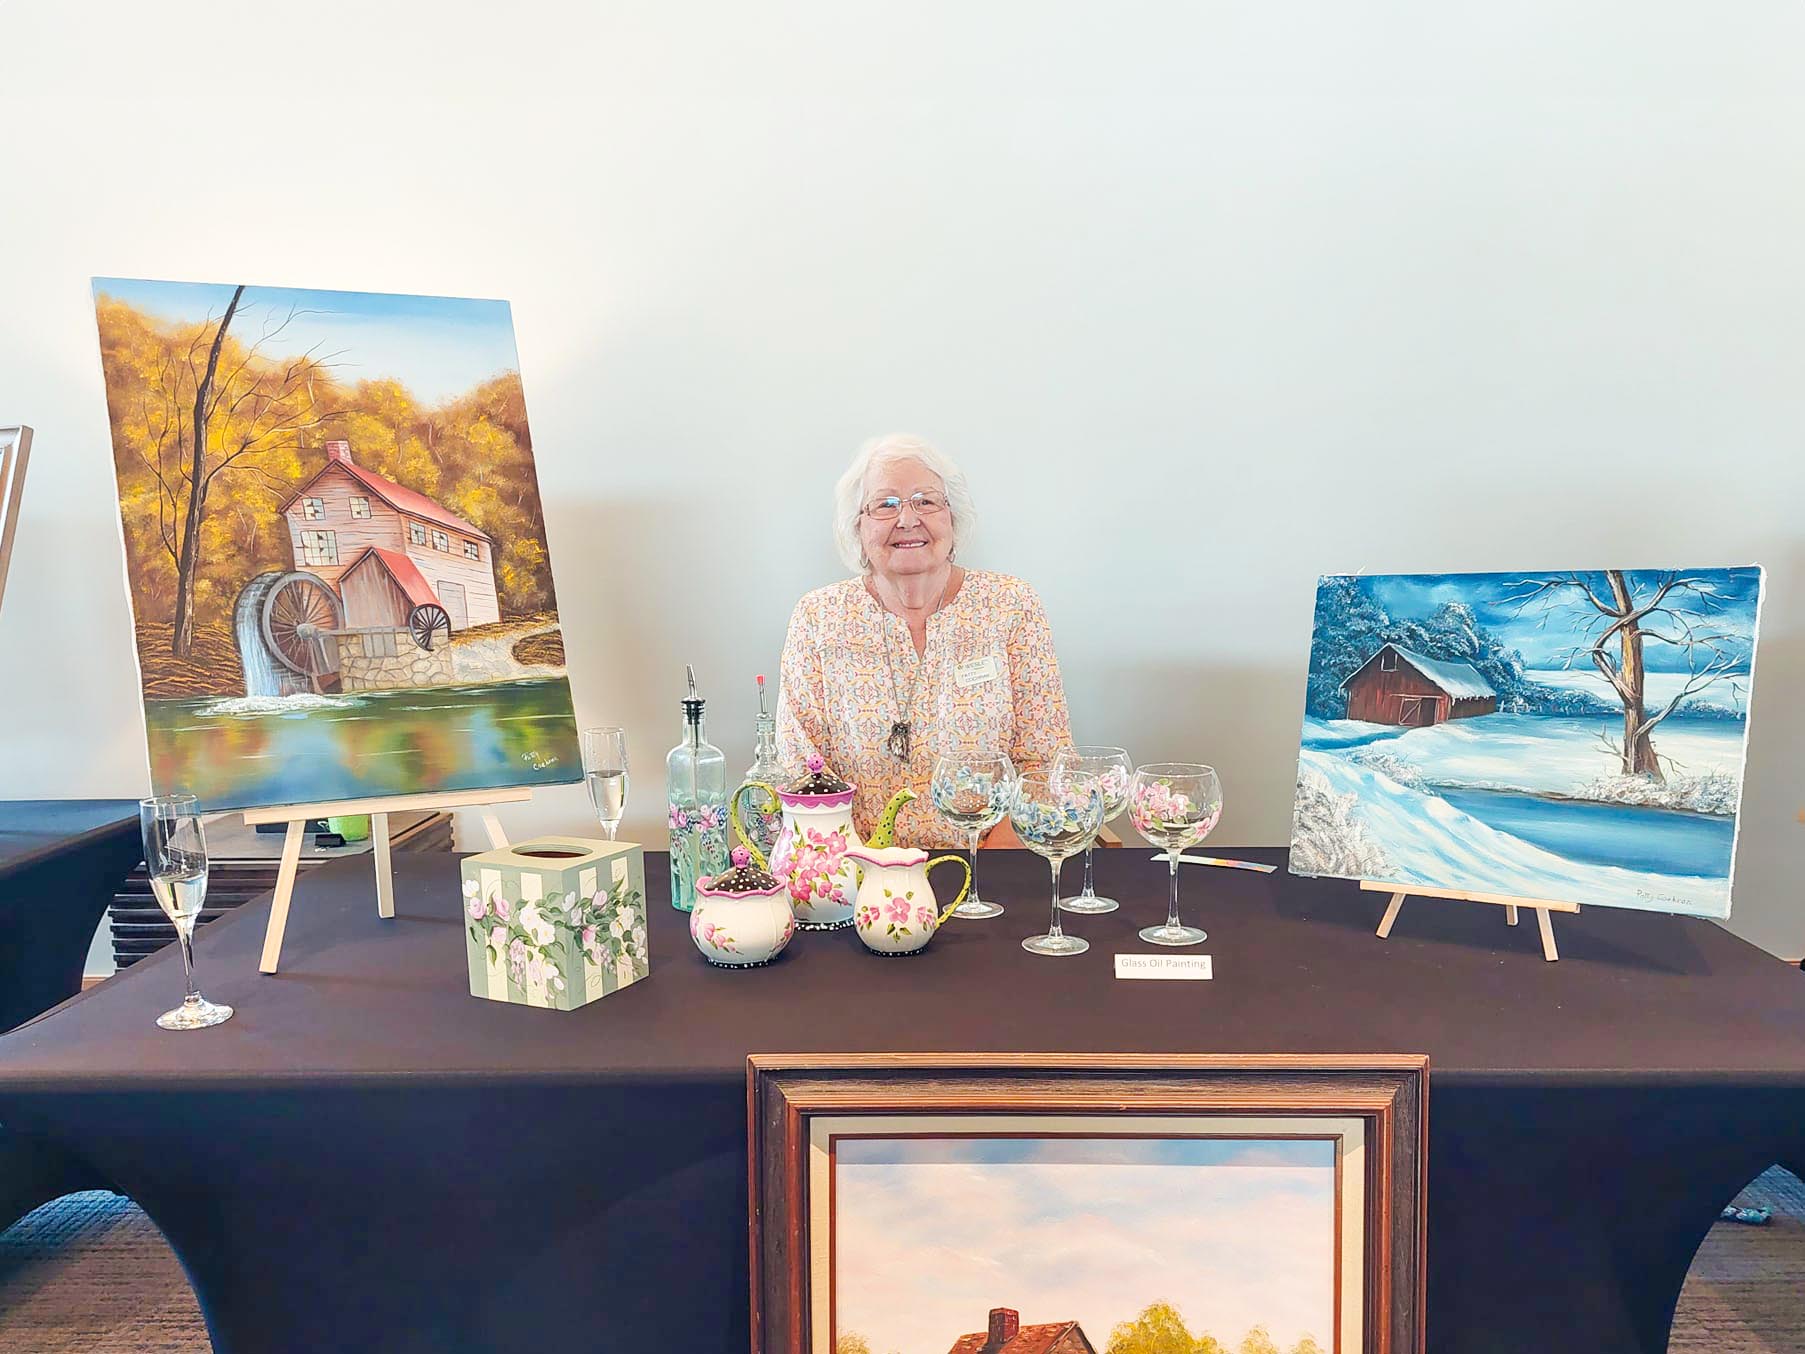 Kind and happy looking older woman with paintings and sculpture art around her seated at a table